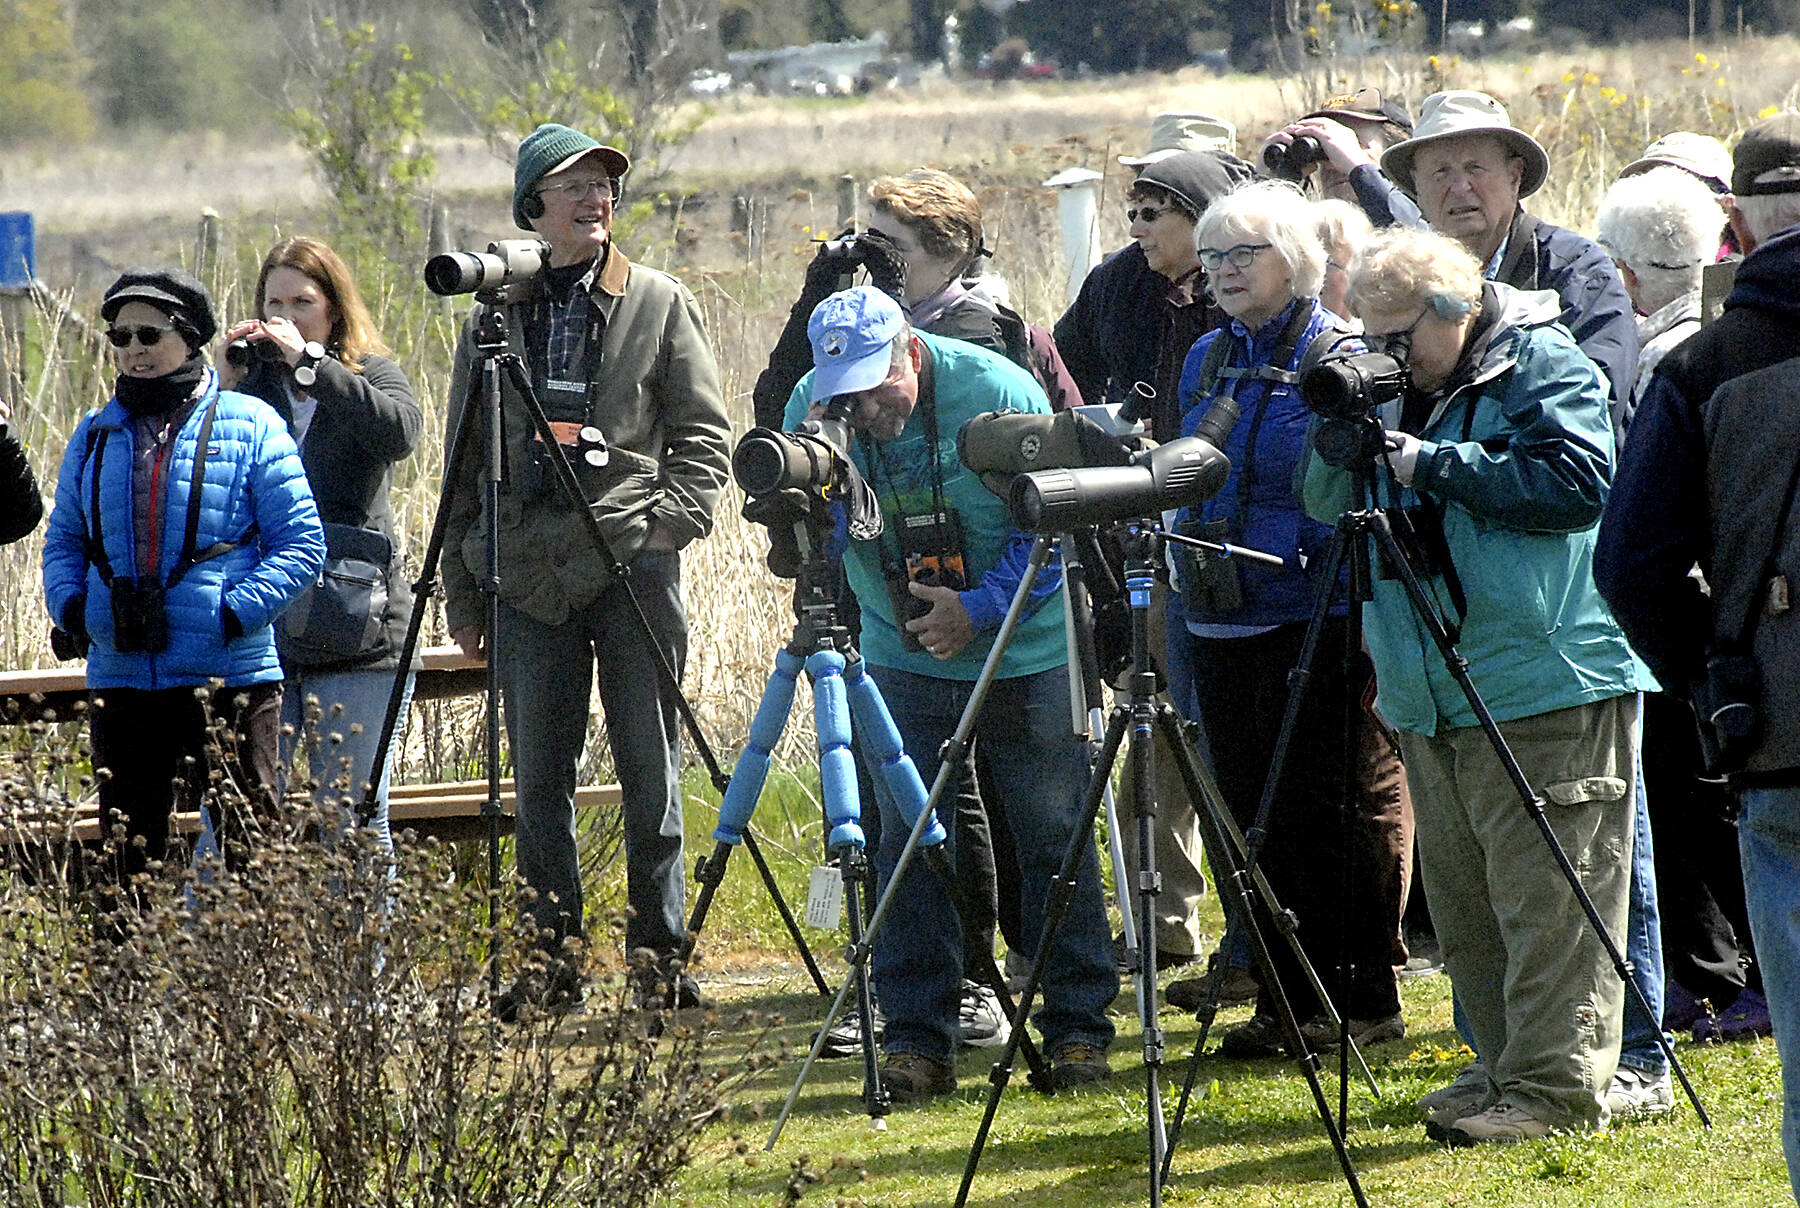 File photo by Keith Thorpe/Olympic Peninsula News Group
Bird watchers search for water fowl on Dungeness Bay from Dungeness Landing County Park north of Sequim during the Olympic BirdFest in 2019.